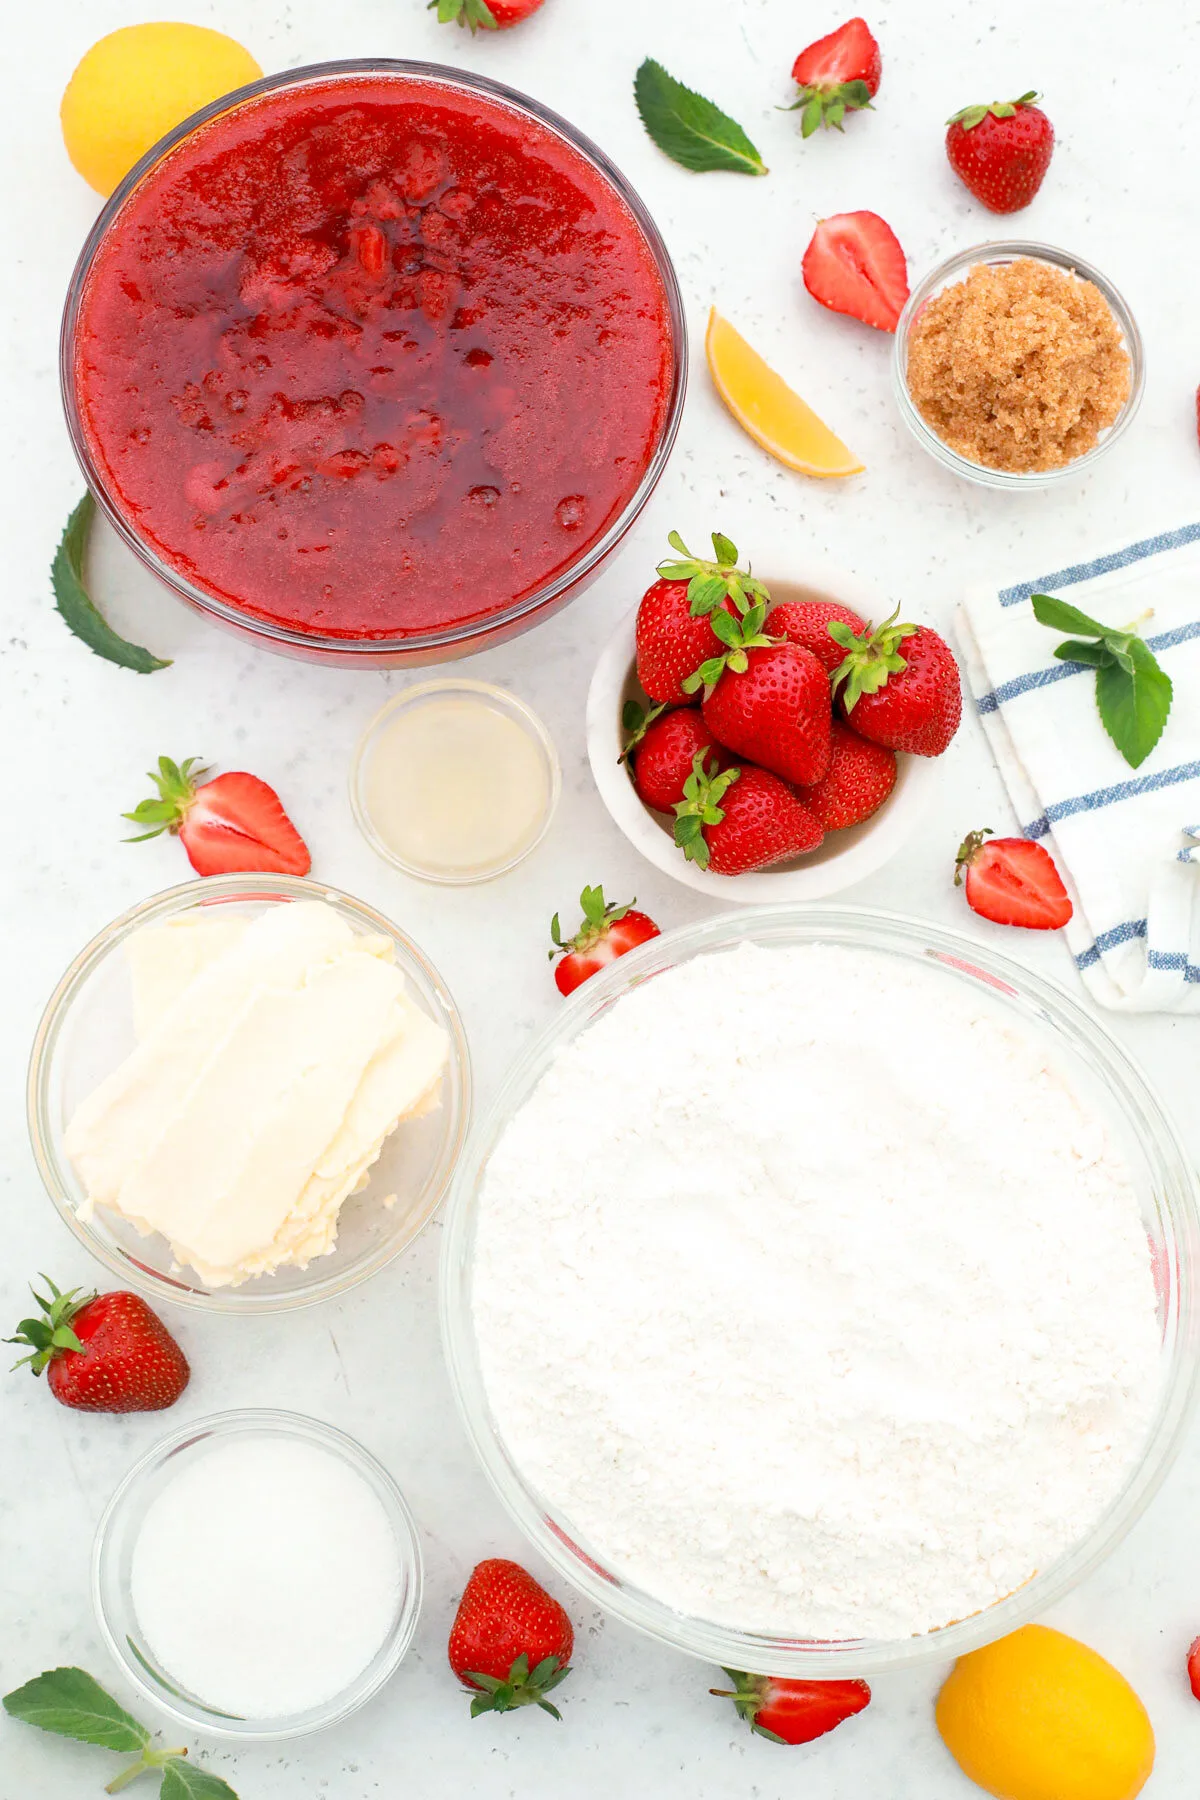 Ingredients for Strawberry Dump Cake.